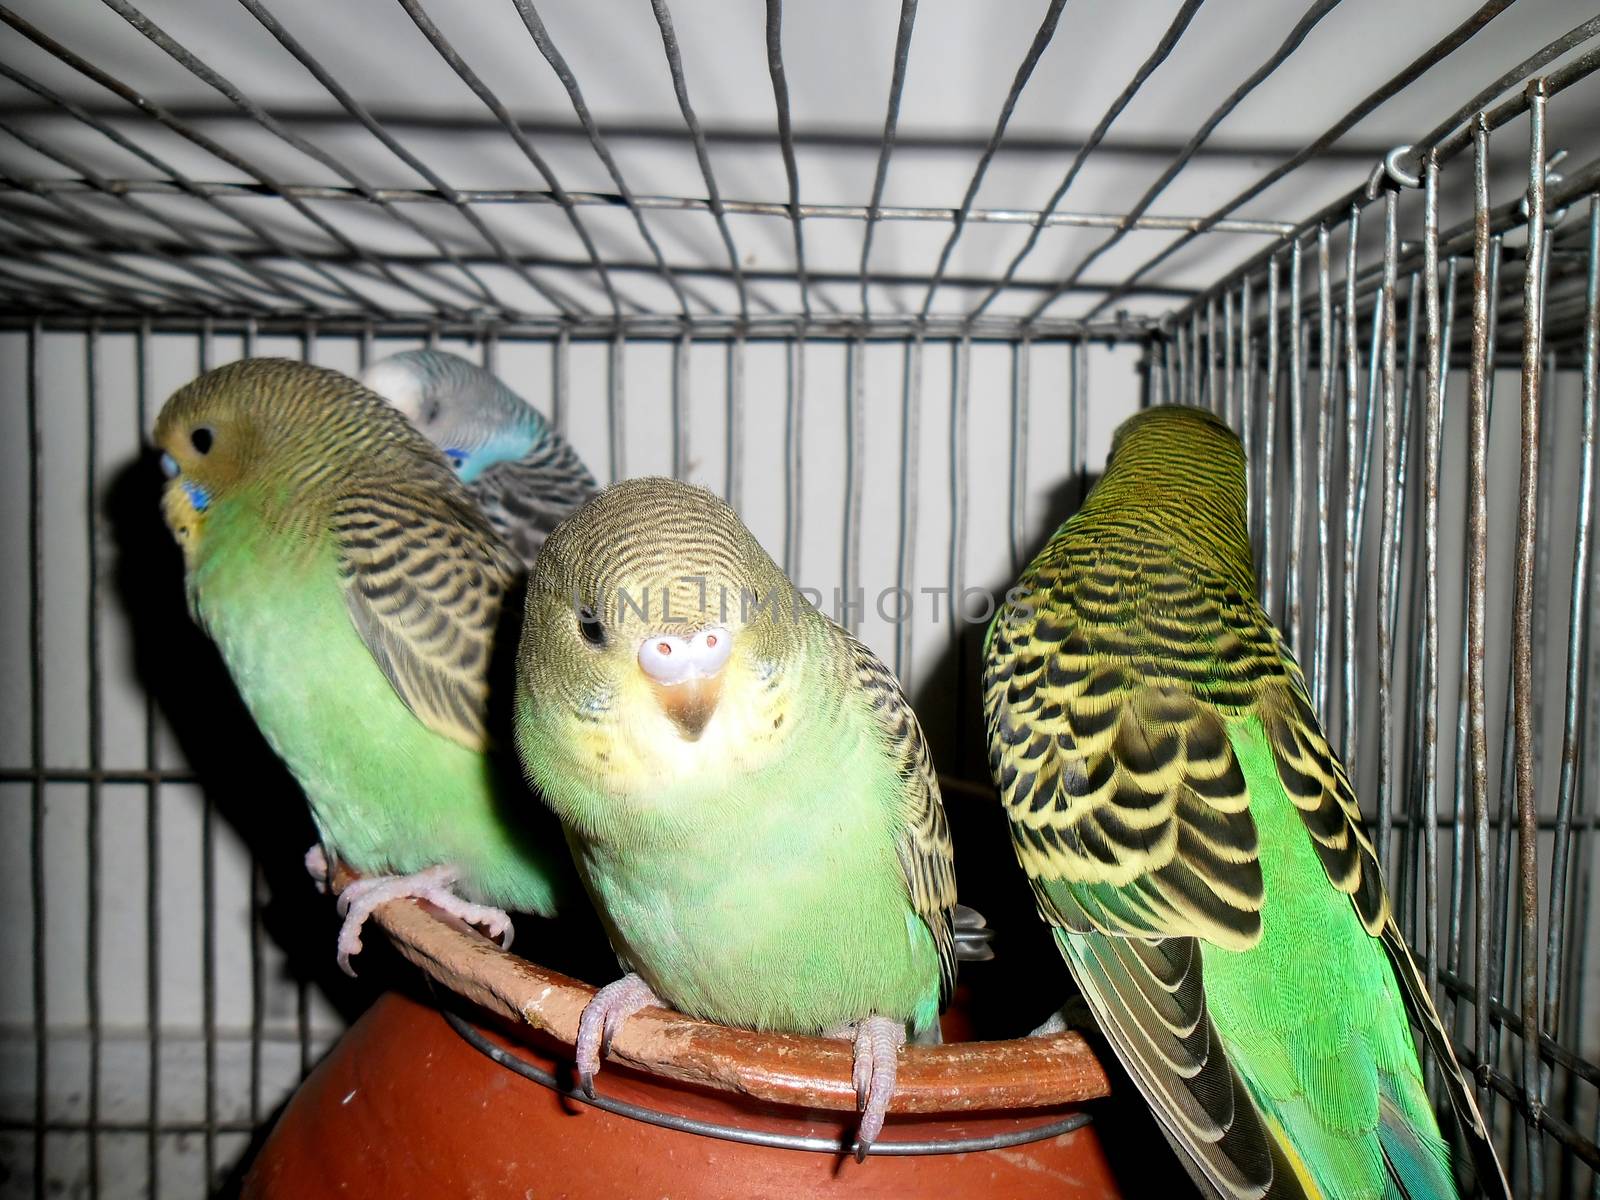 A group of lovely budgerigars by shawlinmohd